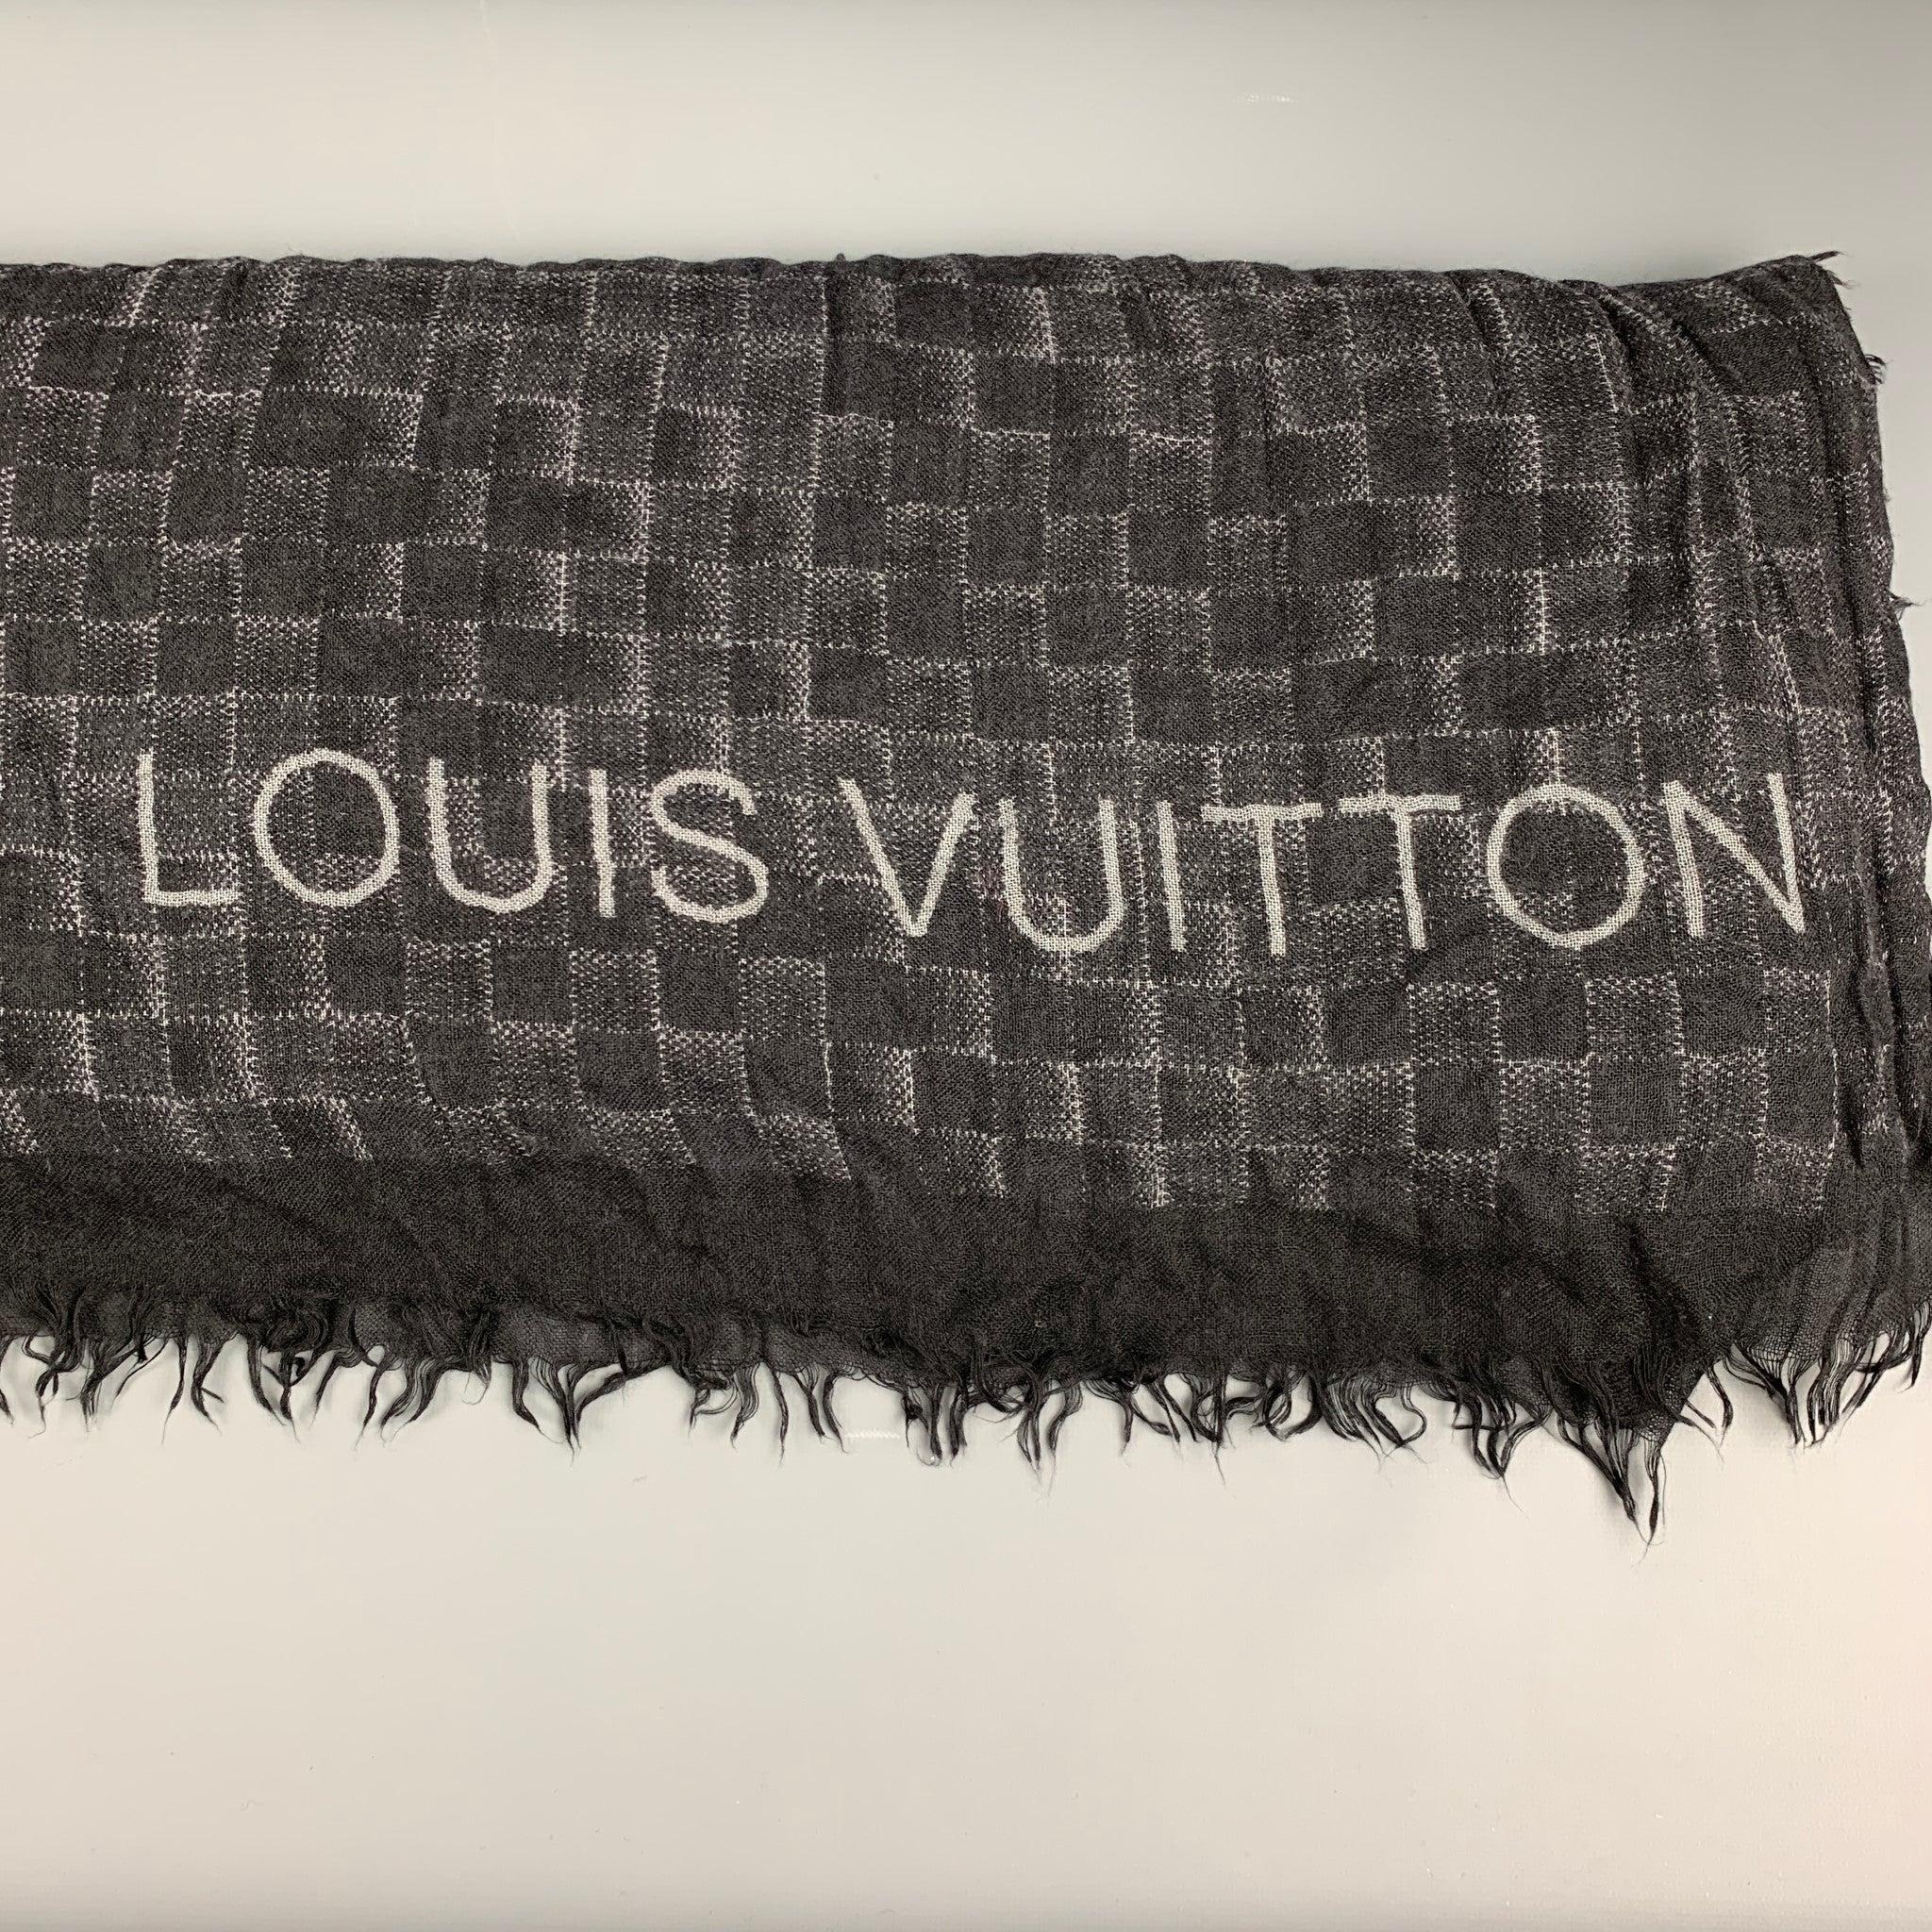 LOUIS VUITTON scarf comes in a black & grey damier print with a fringe trim. Made in Italy. Very Good Pre-Owned Condition. 

Measurements: 
  74 inches  x 52 inches  
  
  
Reference: 126856
Category: Scarves & Shawls
More Details
    
Brand:  LOUIS